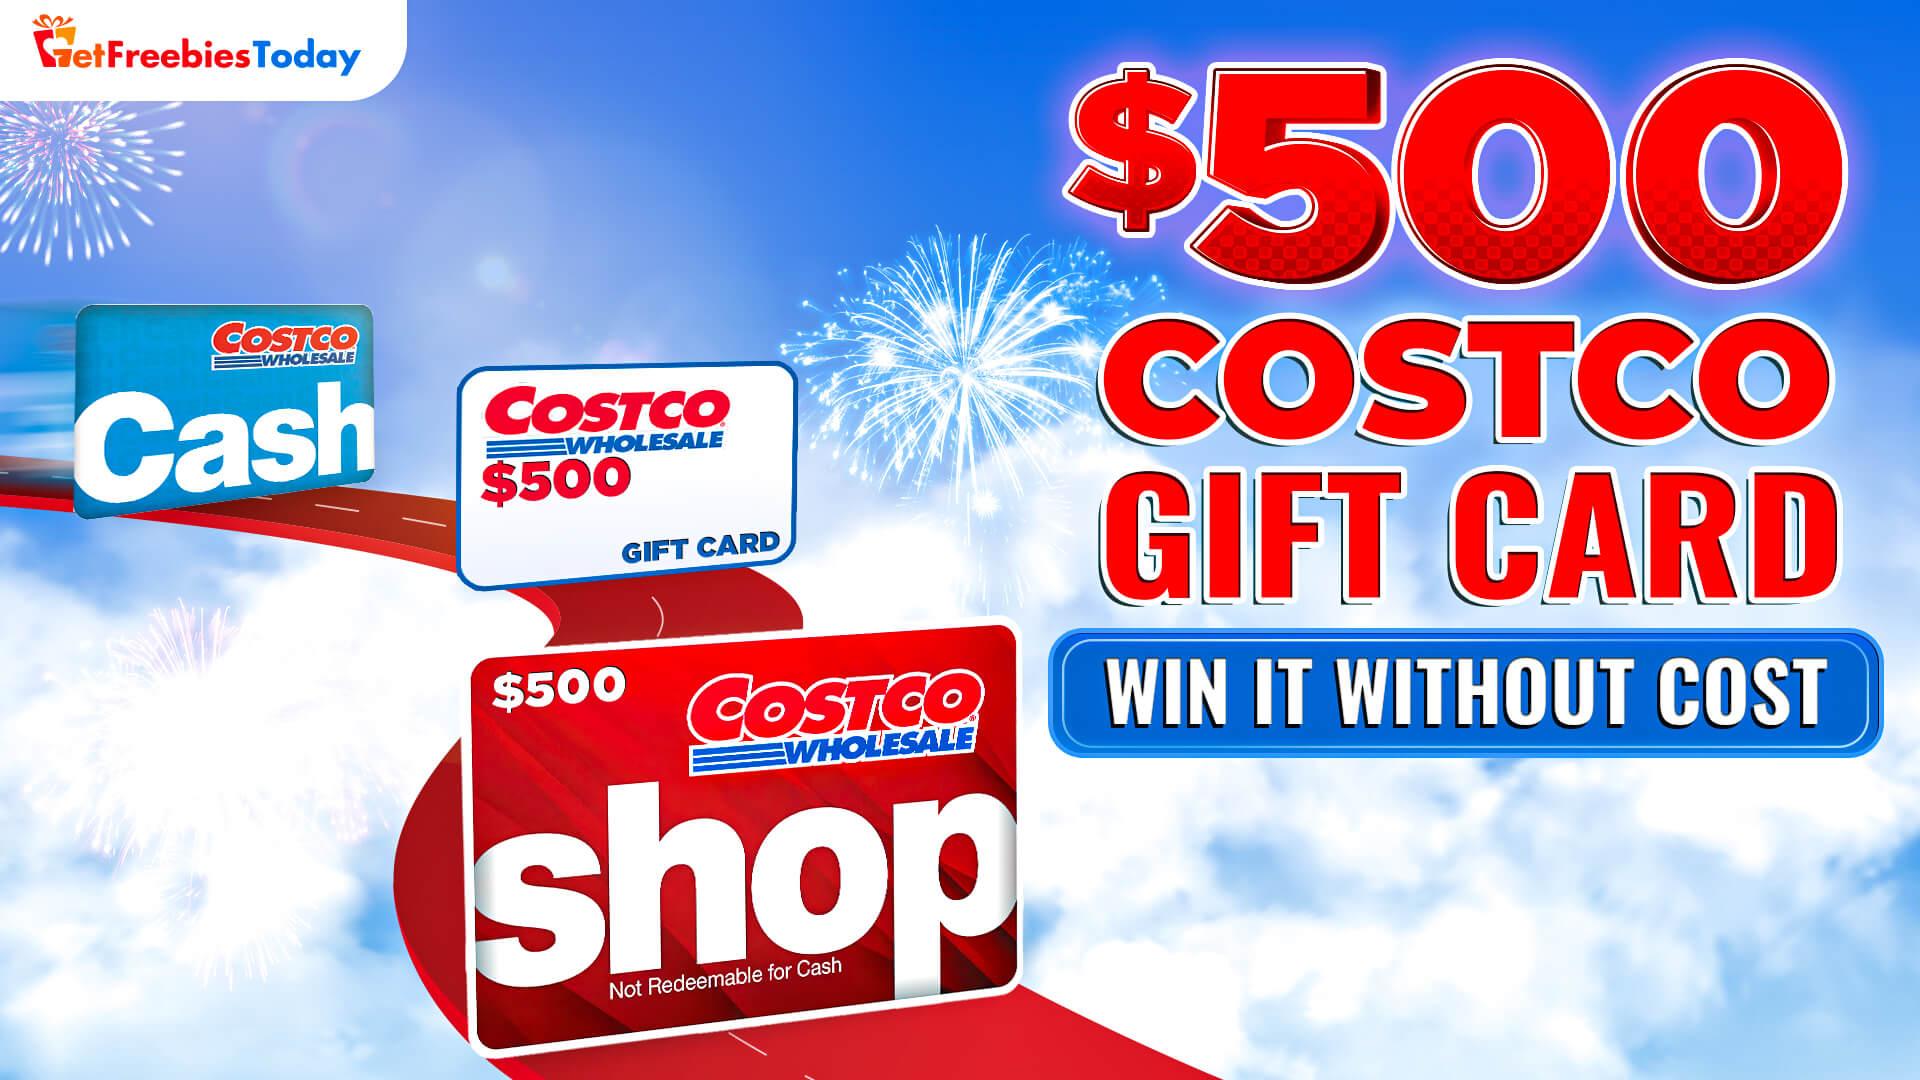 Find $500 Costco Gift Card Here